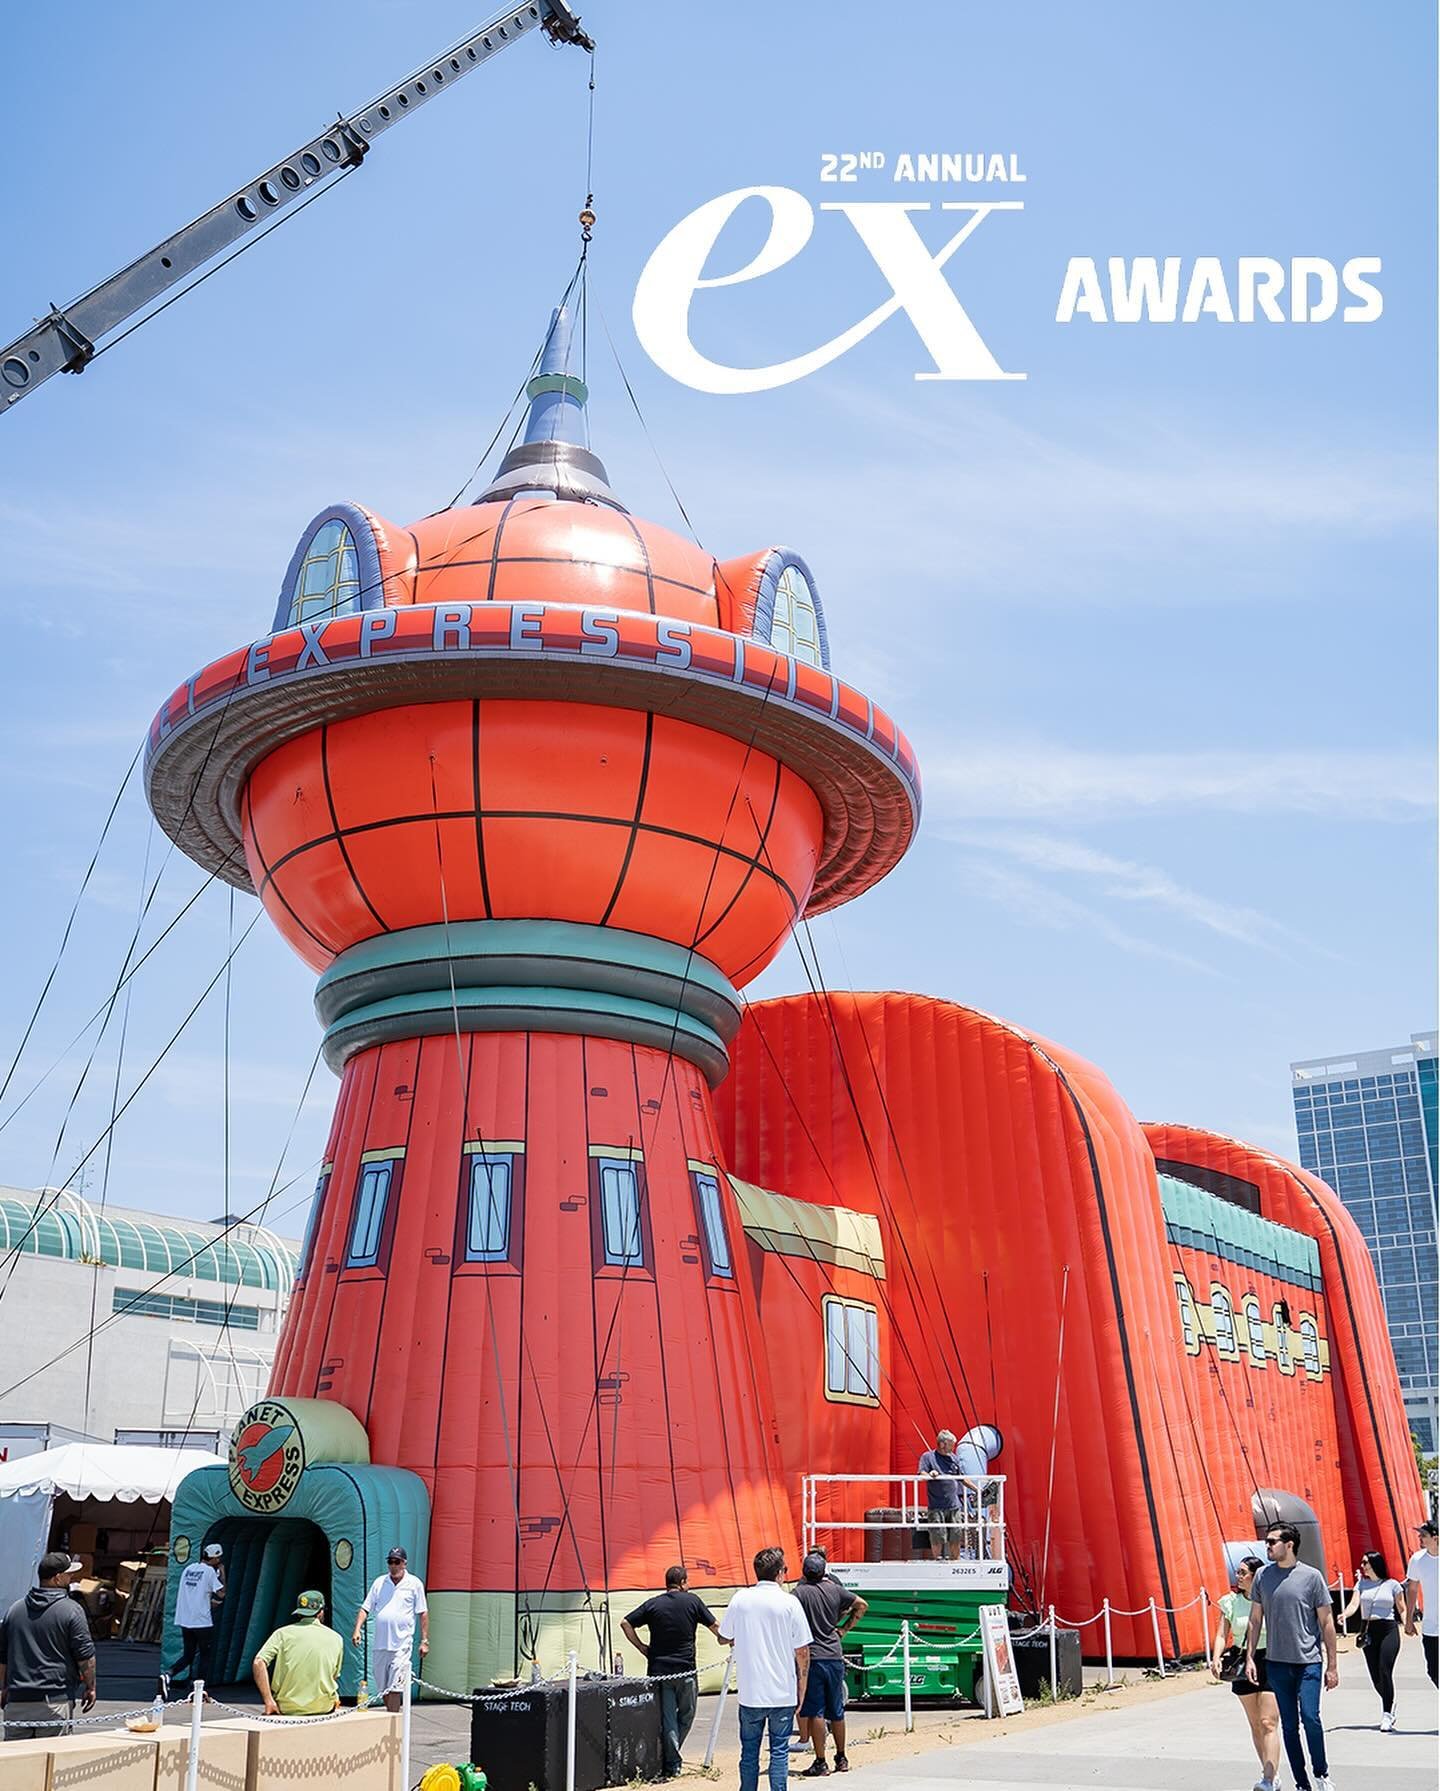 We&rsquo;re proud to share that our @hulu project from #SDCC last year - Animayhem: Enter the 2nd Dimension won the @eventmarketer XE award for best production of an event! 

As a production focused experiential agency, we always strive for excellenc